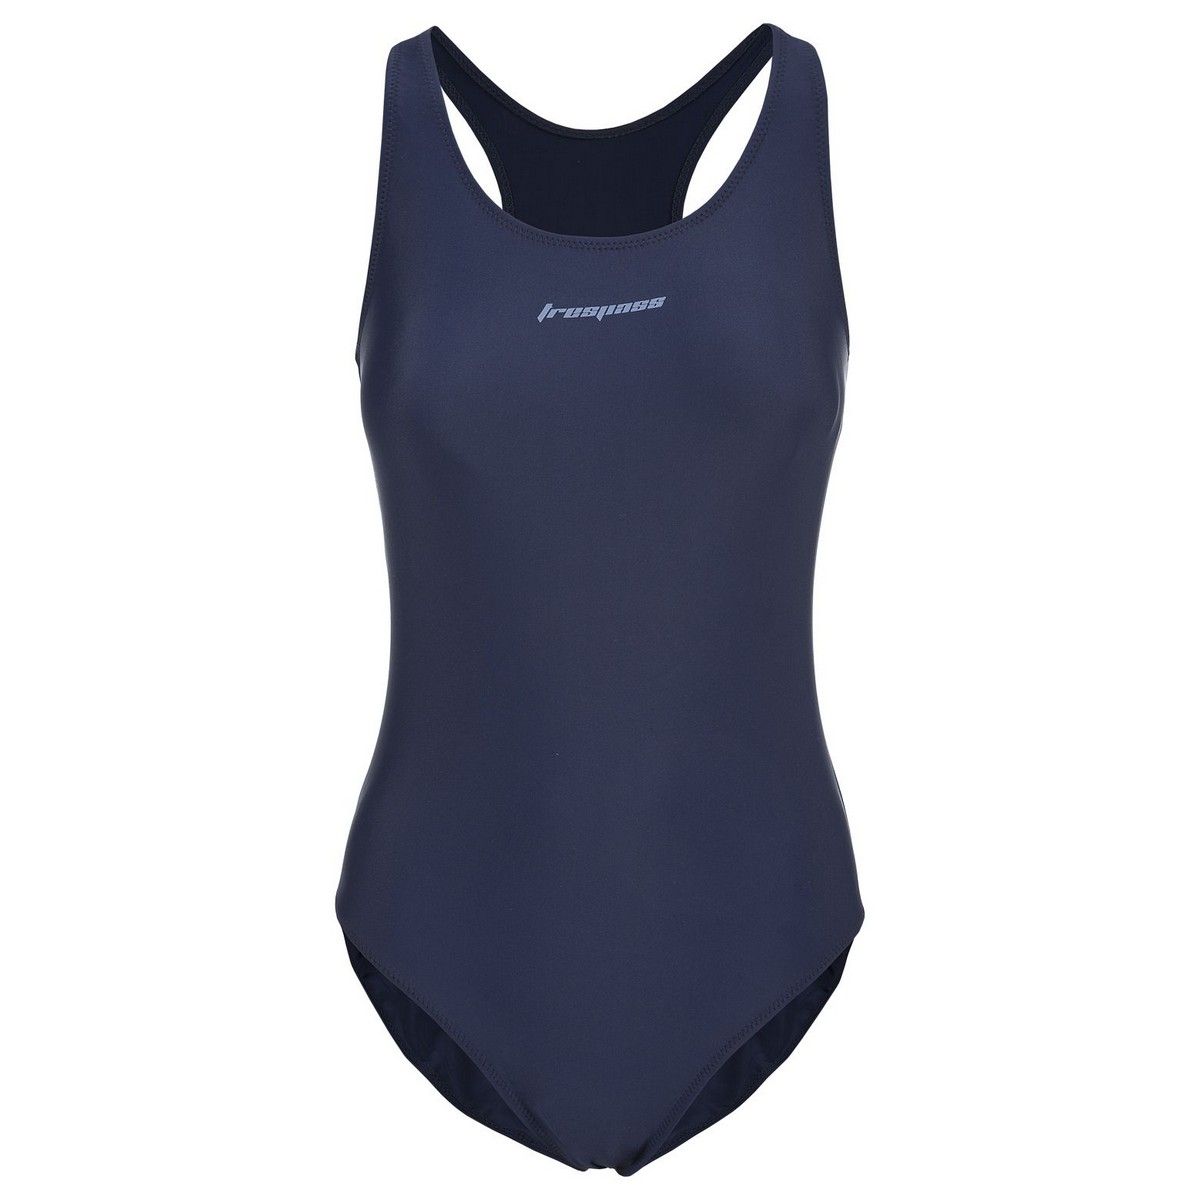 Swimming costume with inner crop top for support. Lined gusset. 80% polyamide, 20% elastane. Trespass Womens Chest Sizing (approx): XS/8 - 32in/81cm, S/10 - 34in/86cm, M/12 - 36in/91.4cm, L/14 - 38in/96.5cm, XL/16 - 40in/101.5cm, XXL/18 - 42in/106.5cm.